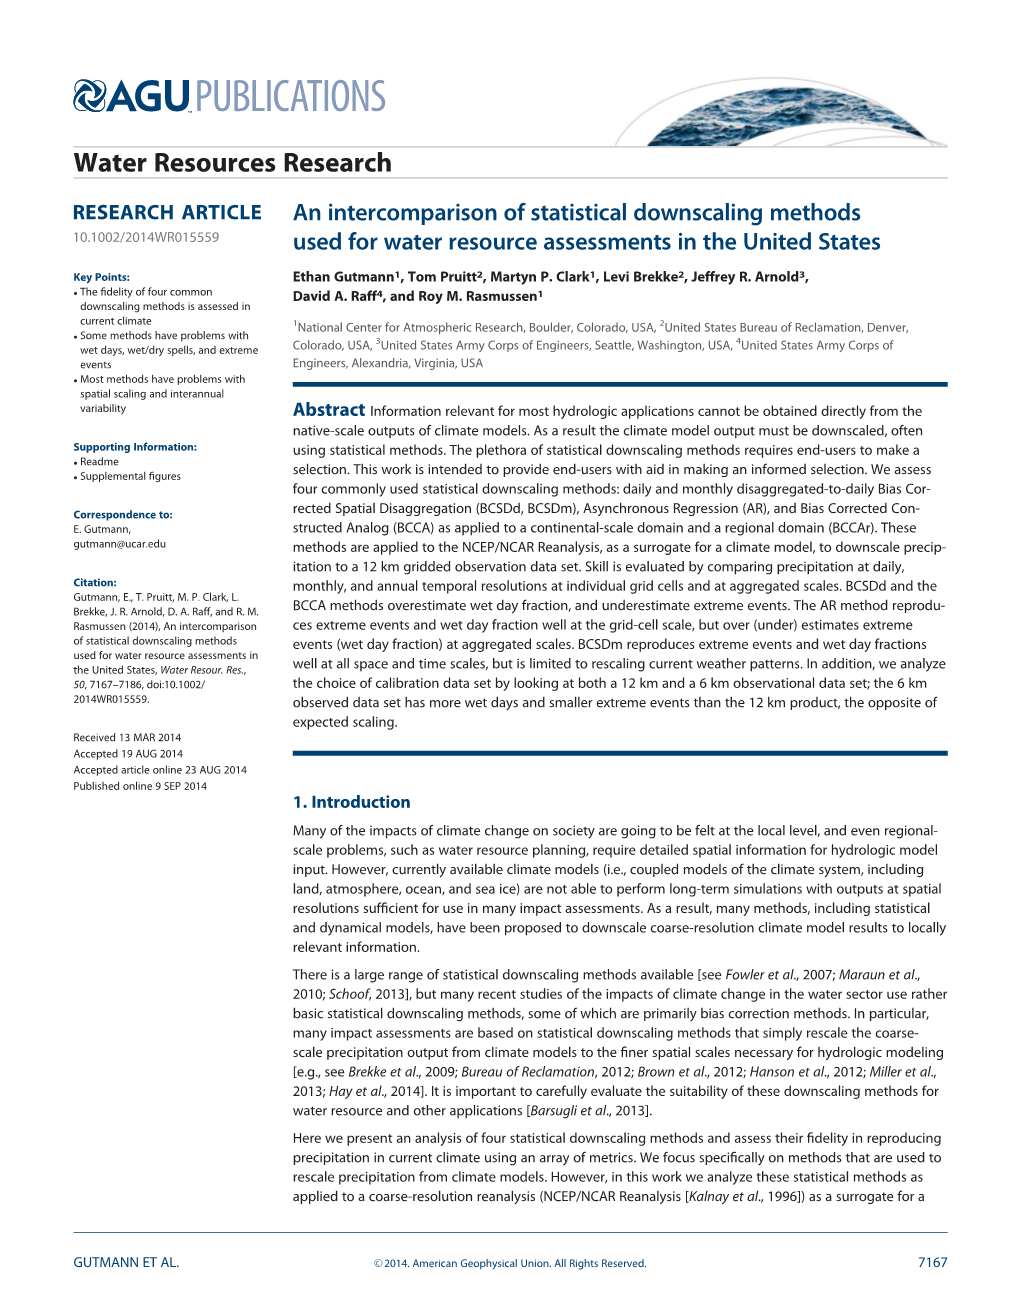 An Intercomparison of Statistical Downscaling Methods Used For